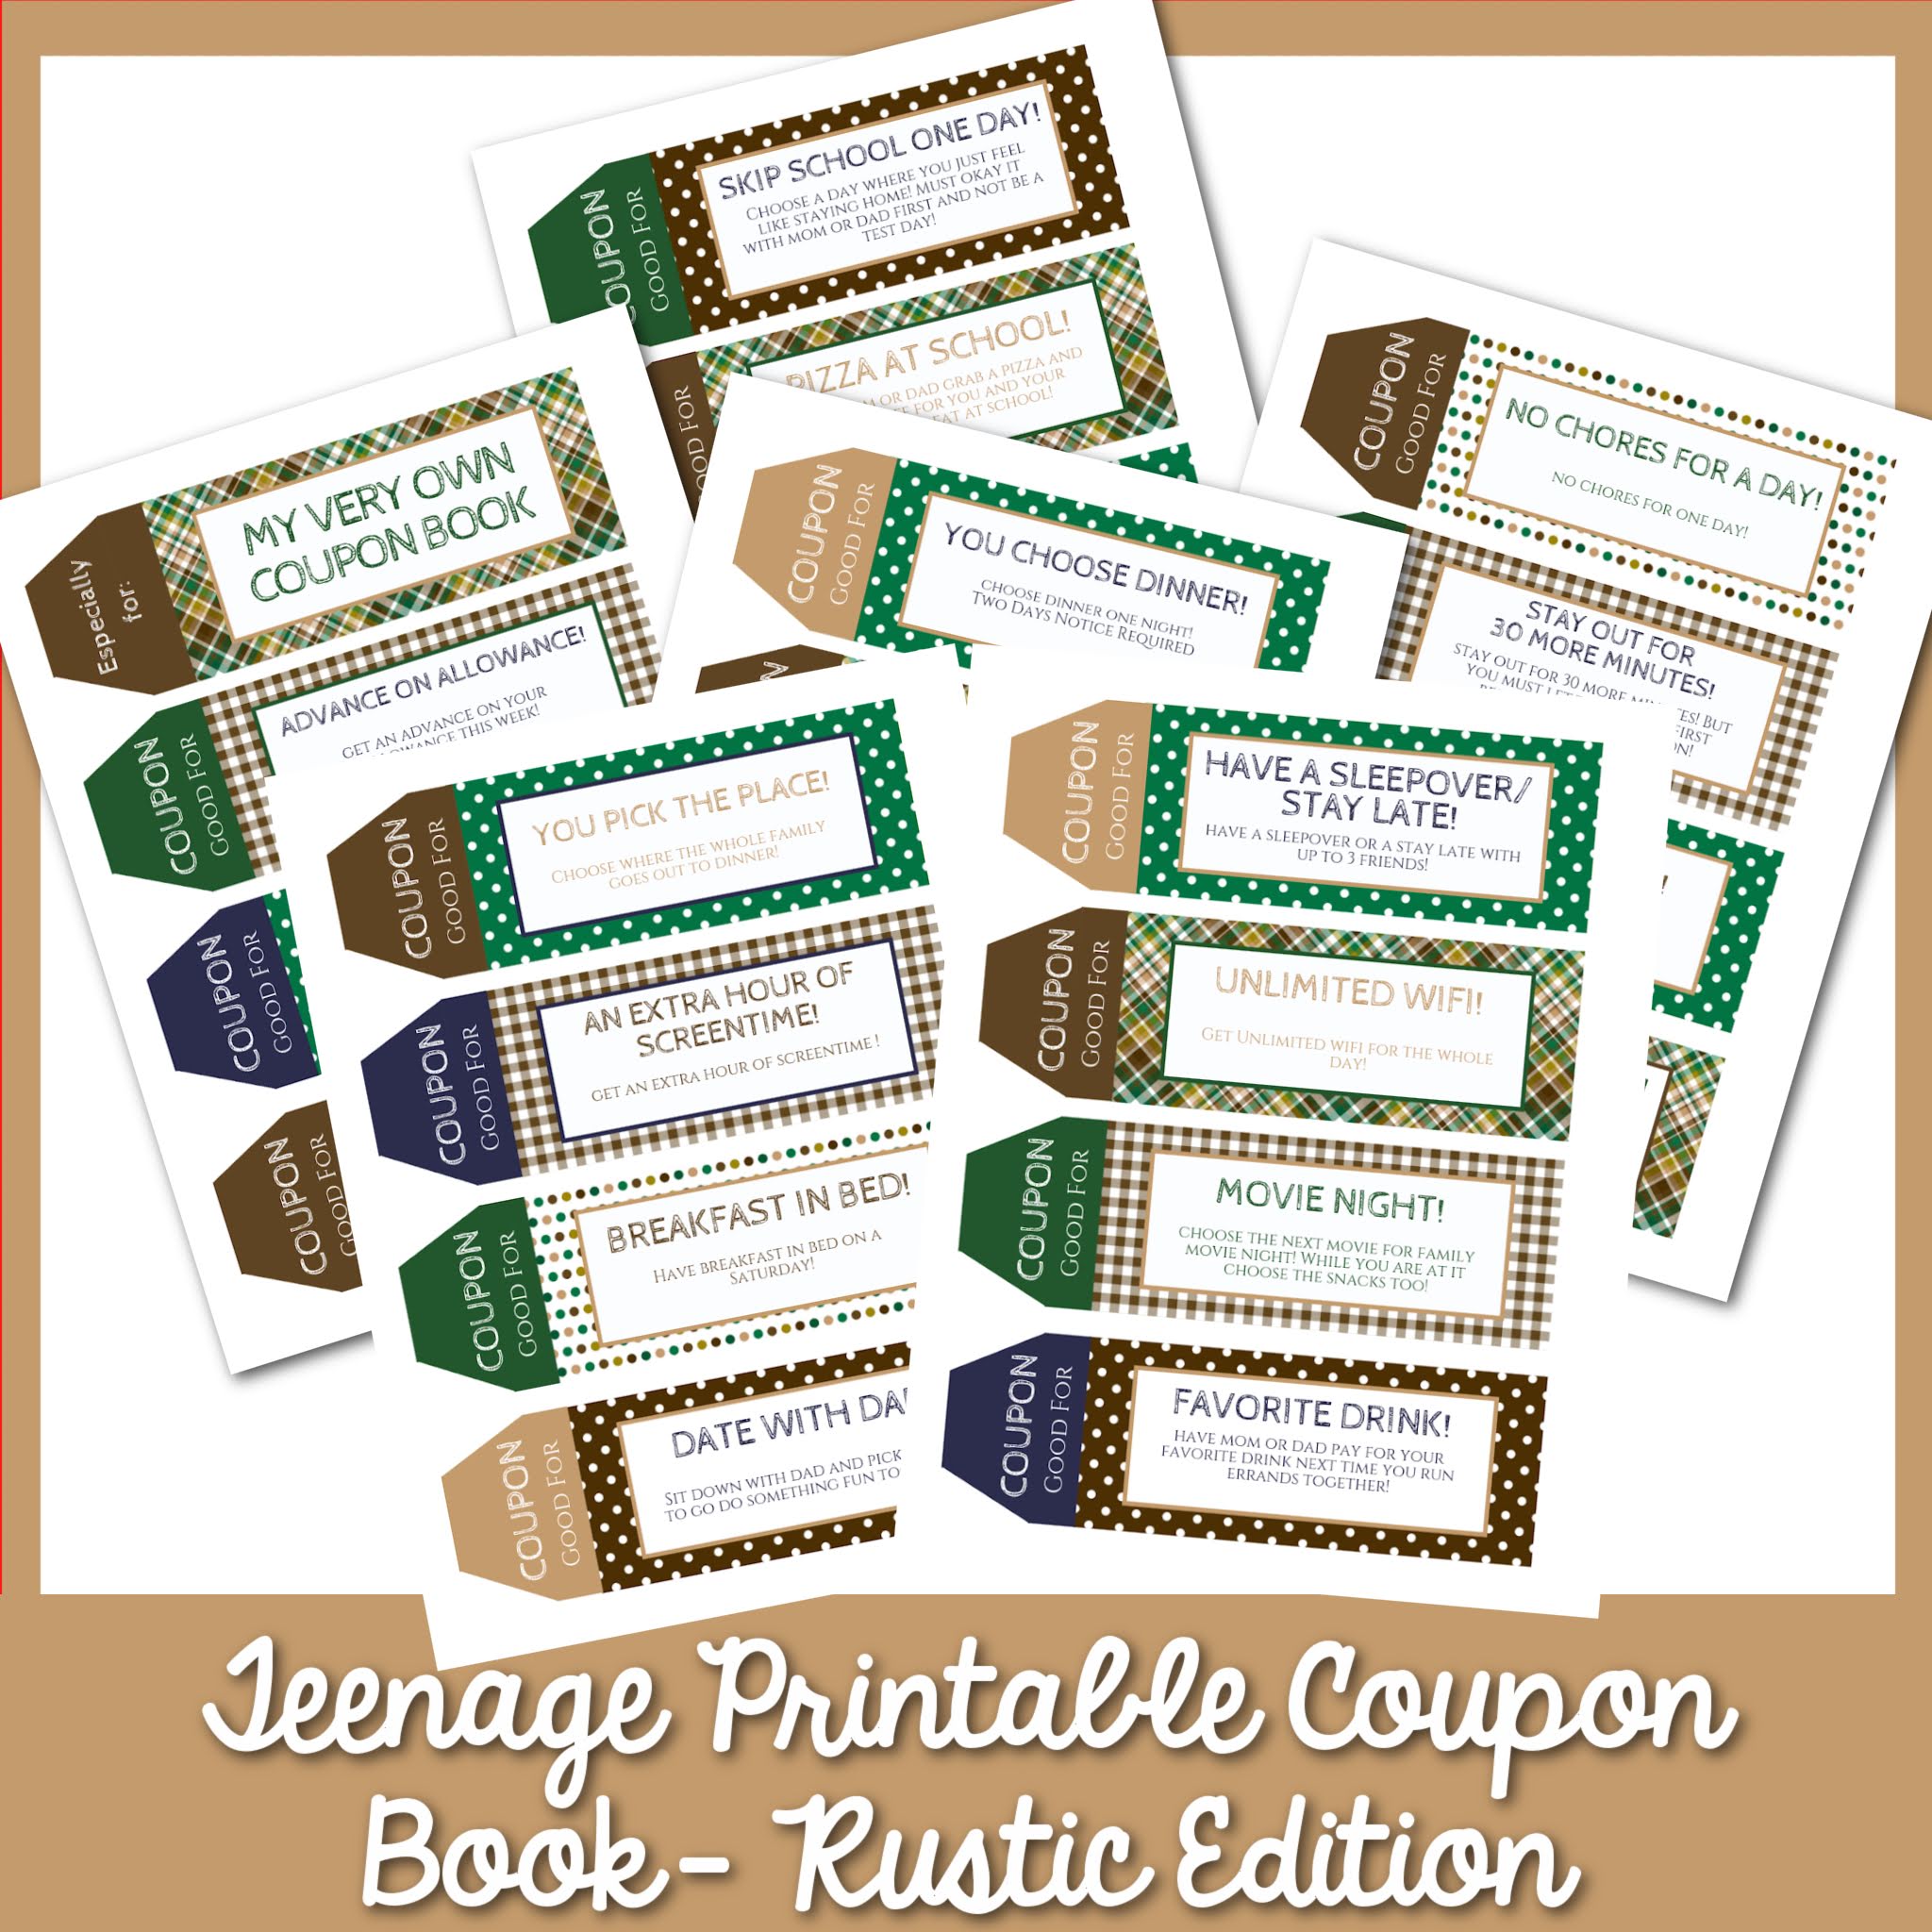 Rustic Teenager Printable Coupon Book perfect for Teens and Tweens!